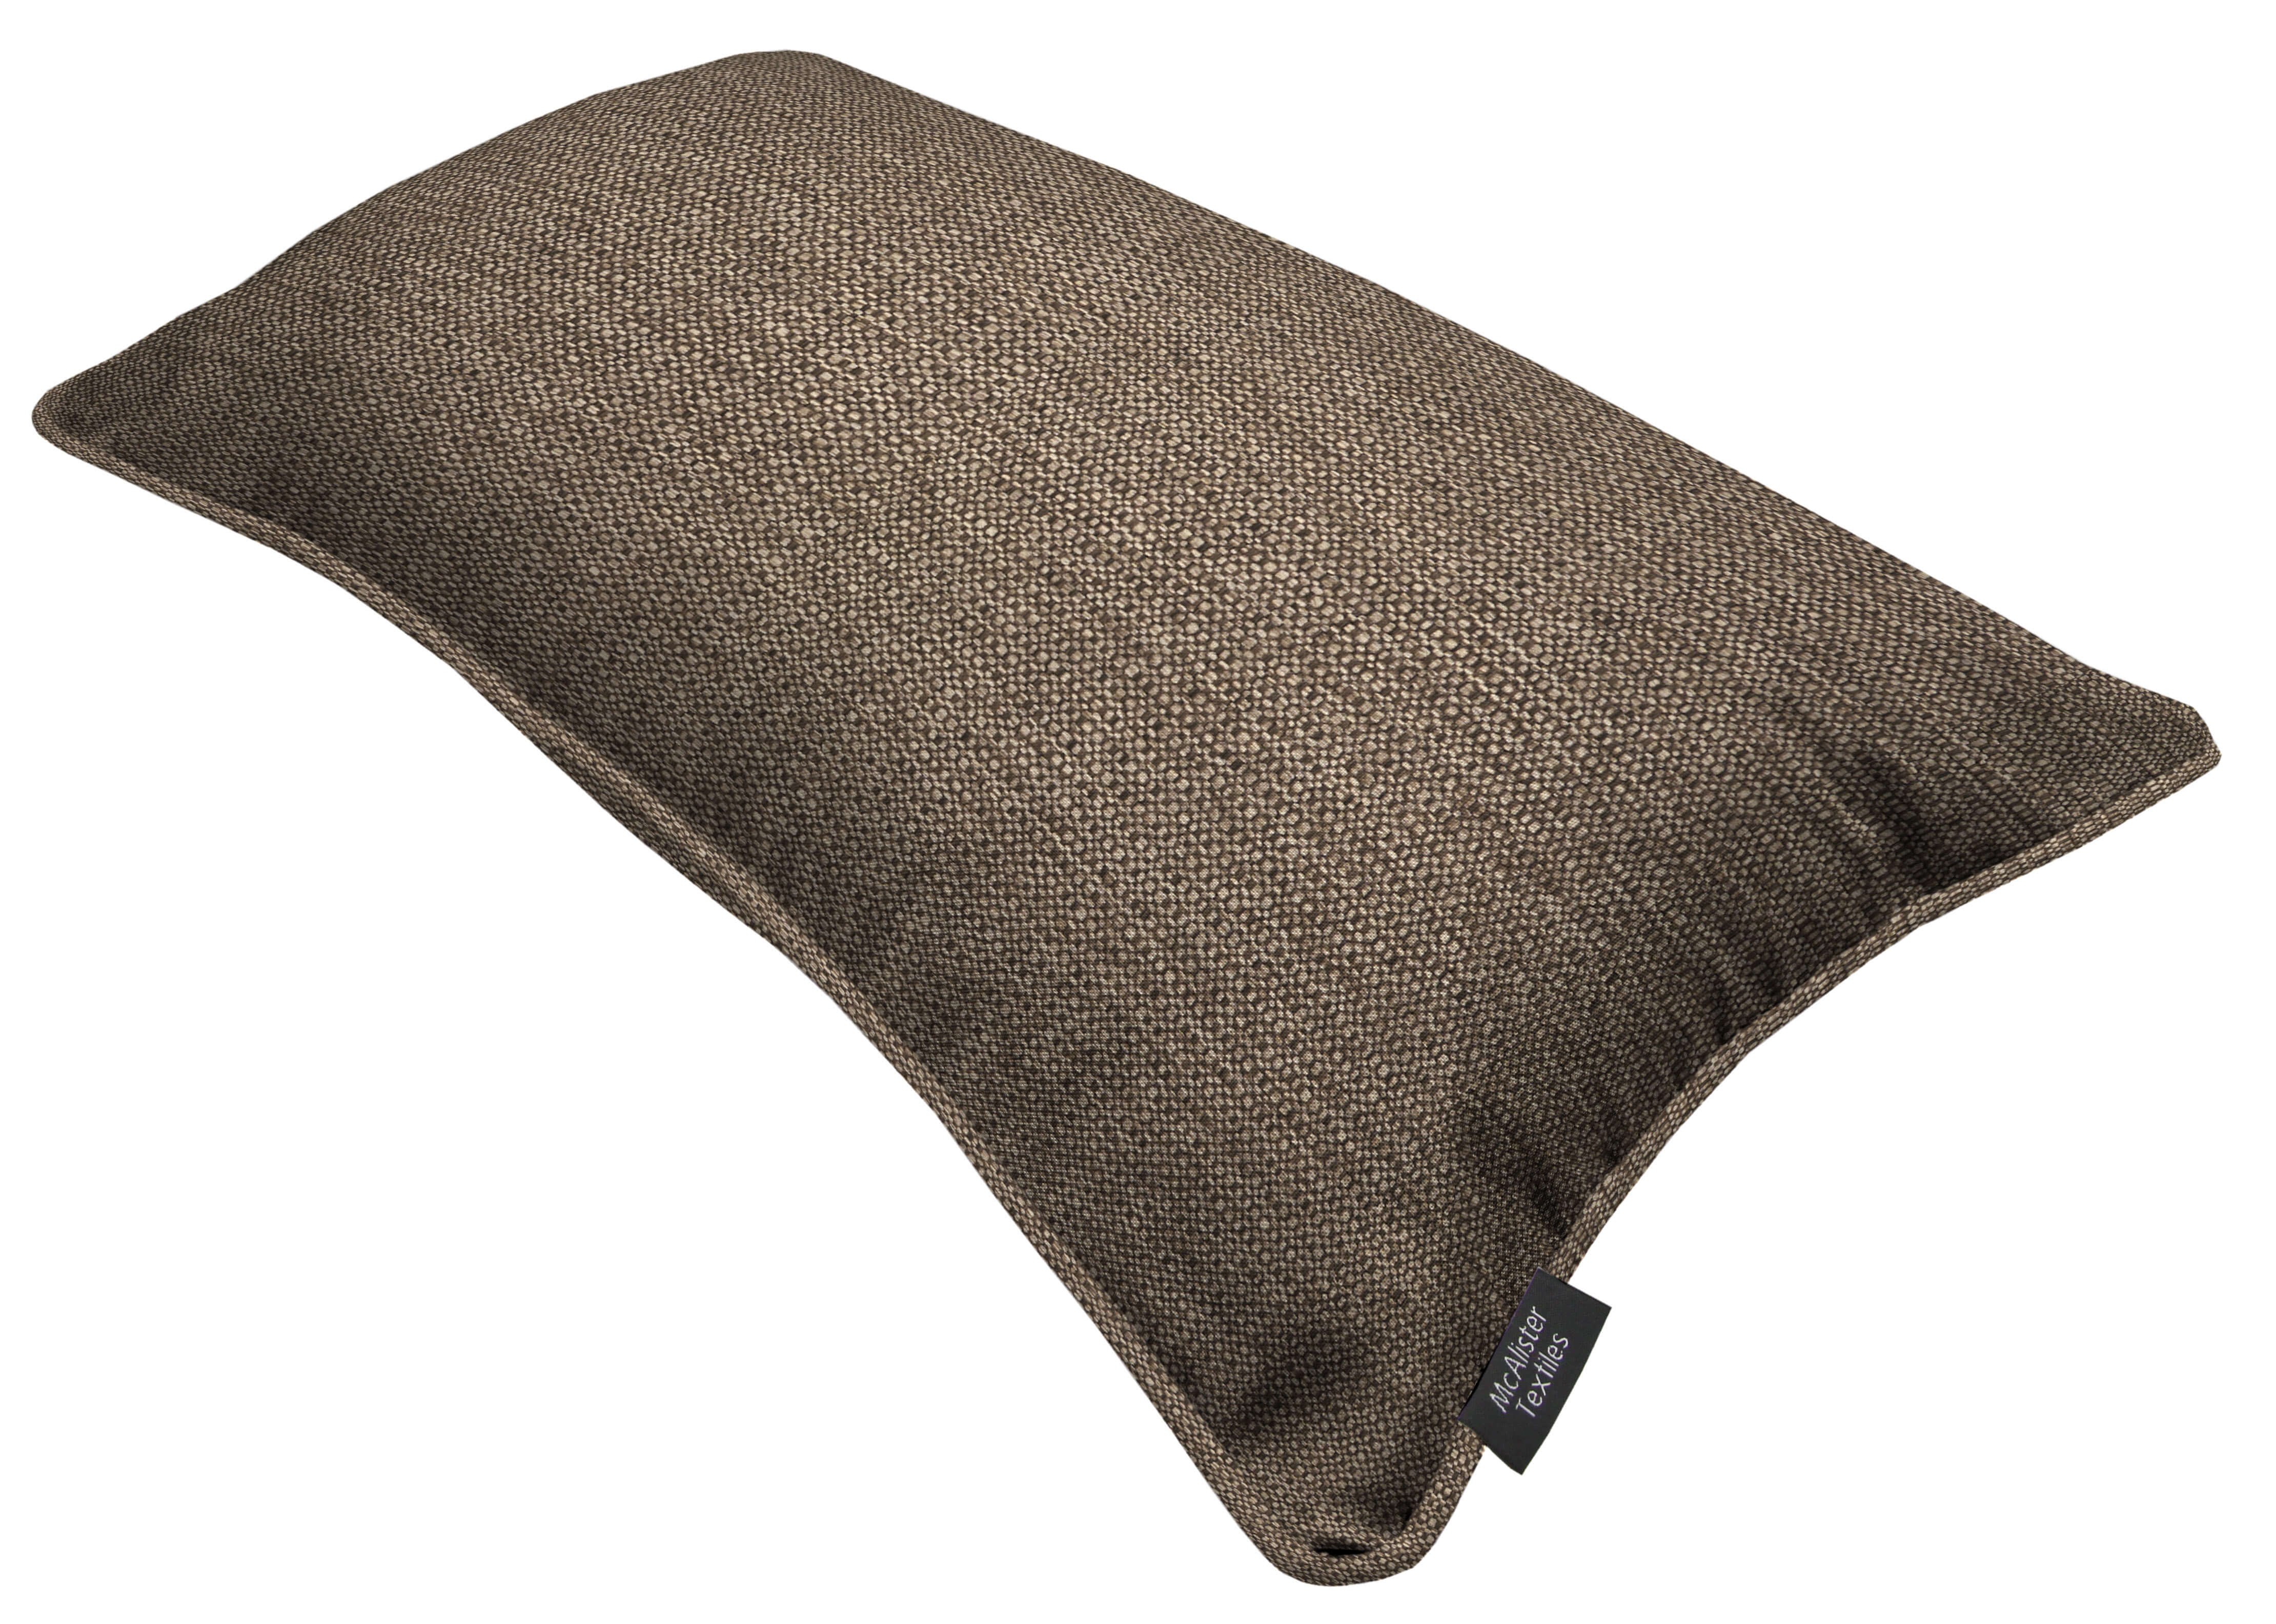 Roma Brown Piped Cushion